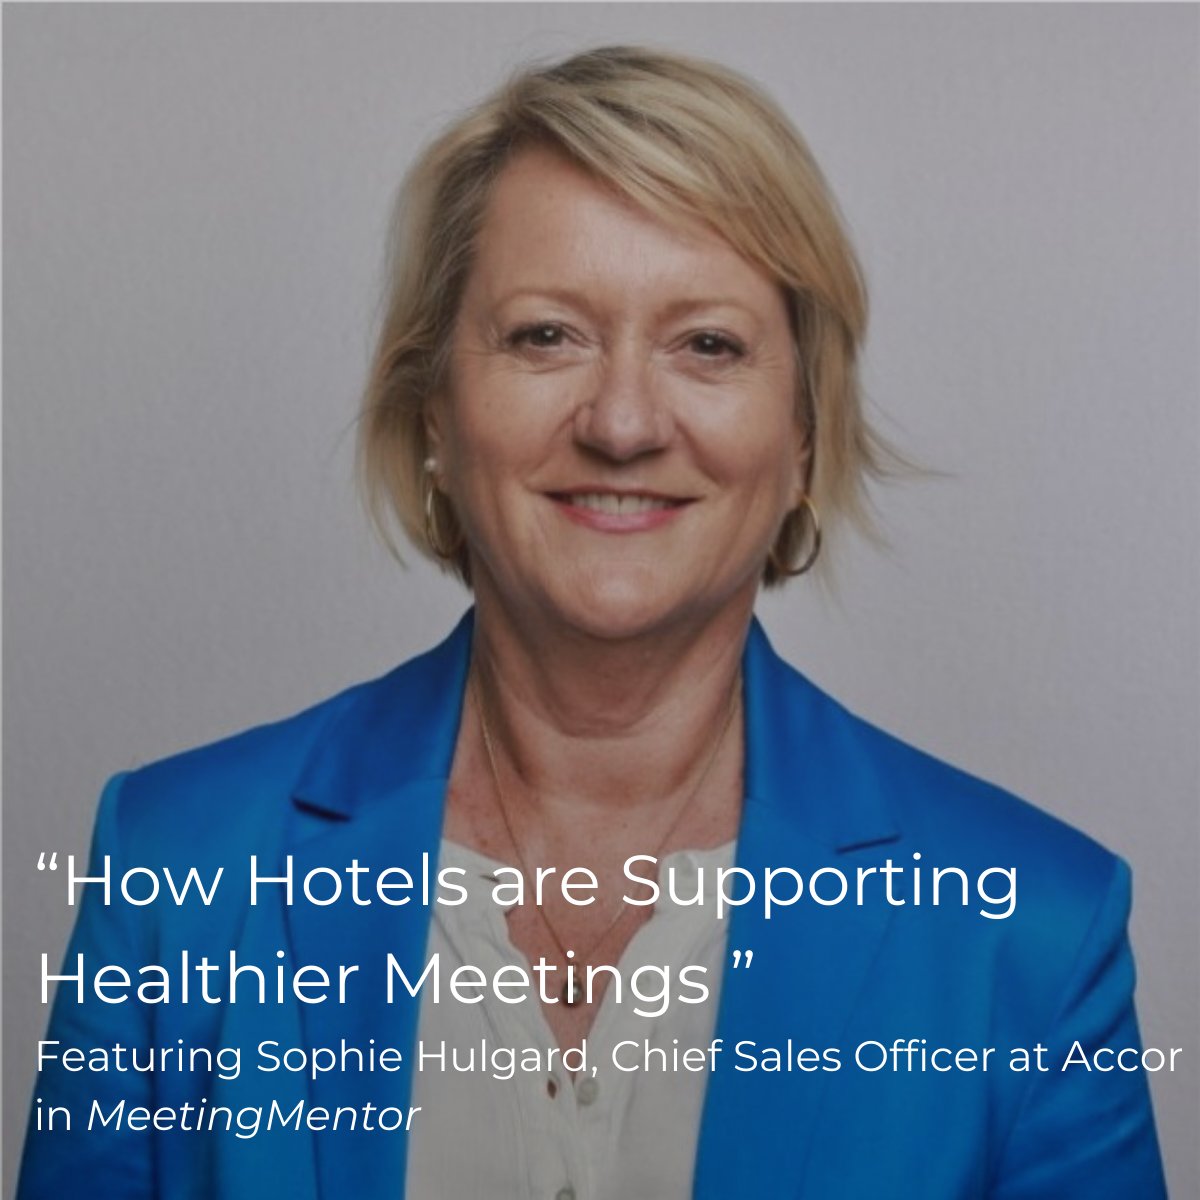 🗞️Read now in Meeting Mentor magazine: Sophie Hulgard, our Chief Sales Officer, highlights how corporate meetings are evolving to prioritize wellness. Accor is leading the charge, emphasizing well-being and sustainability in our hospitality practices. bit.ly/3INRAI4